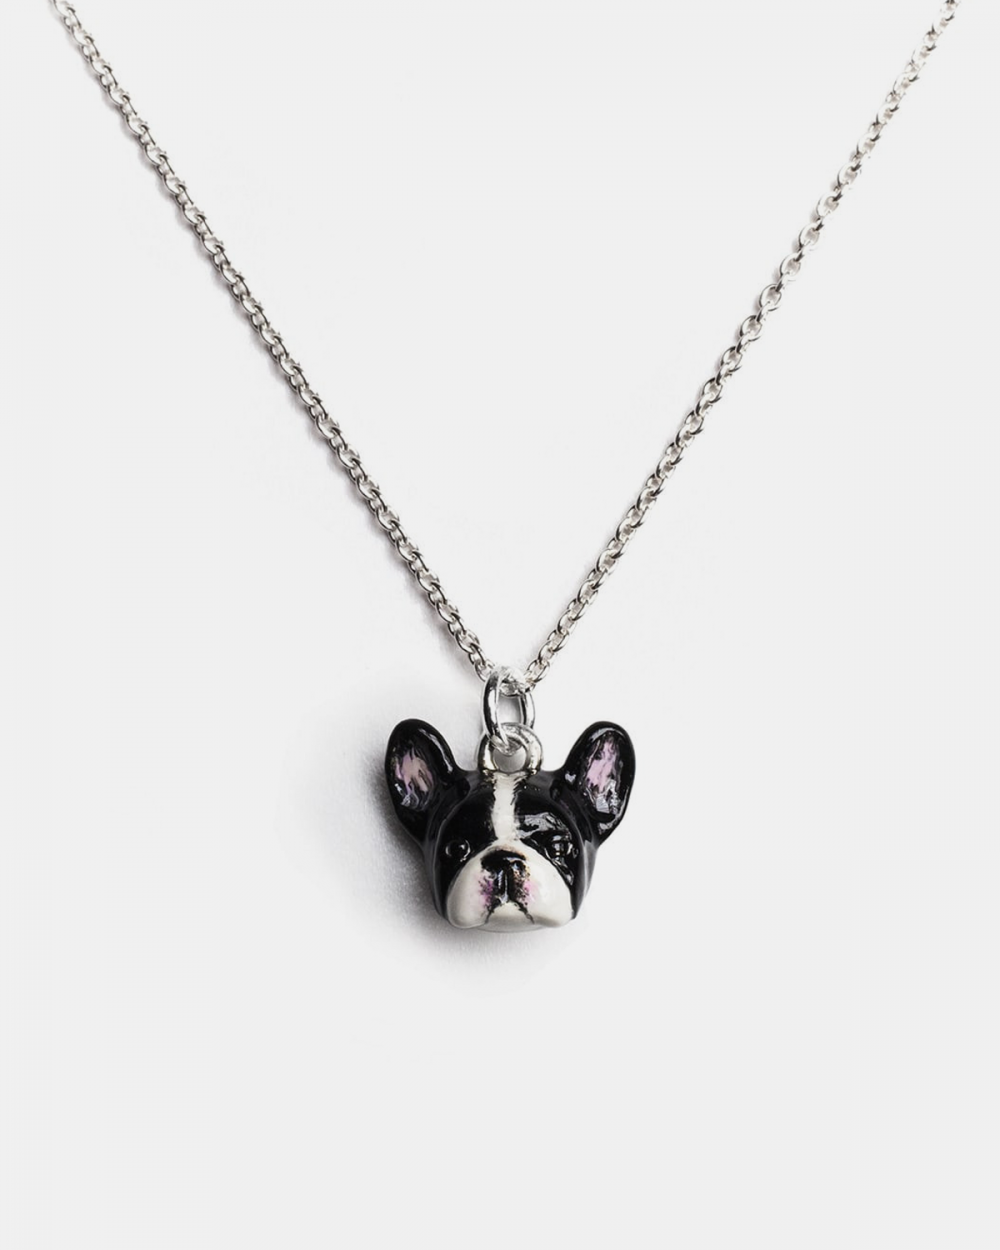 Chain Included 925 Sterling Silver French Bulldog Pendant Necklace